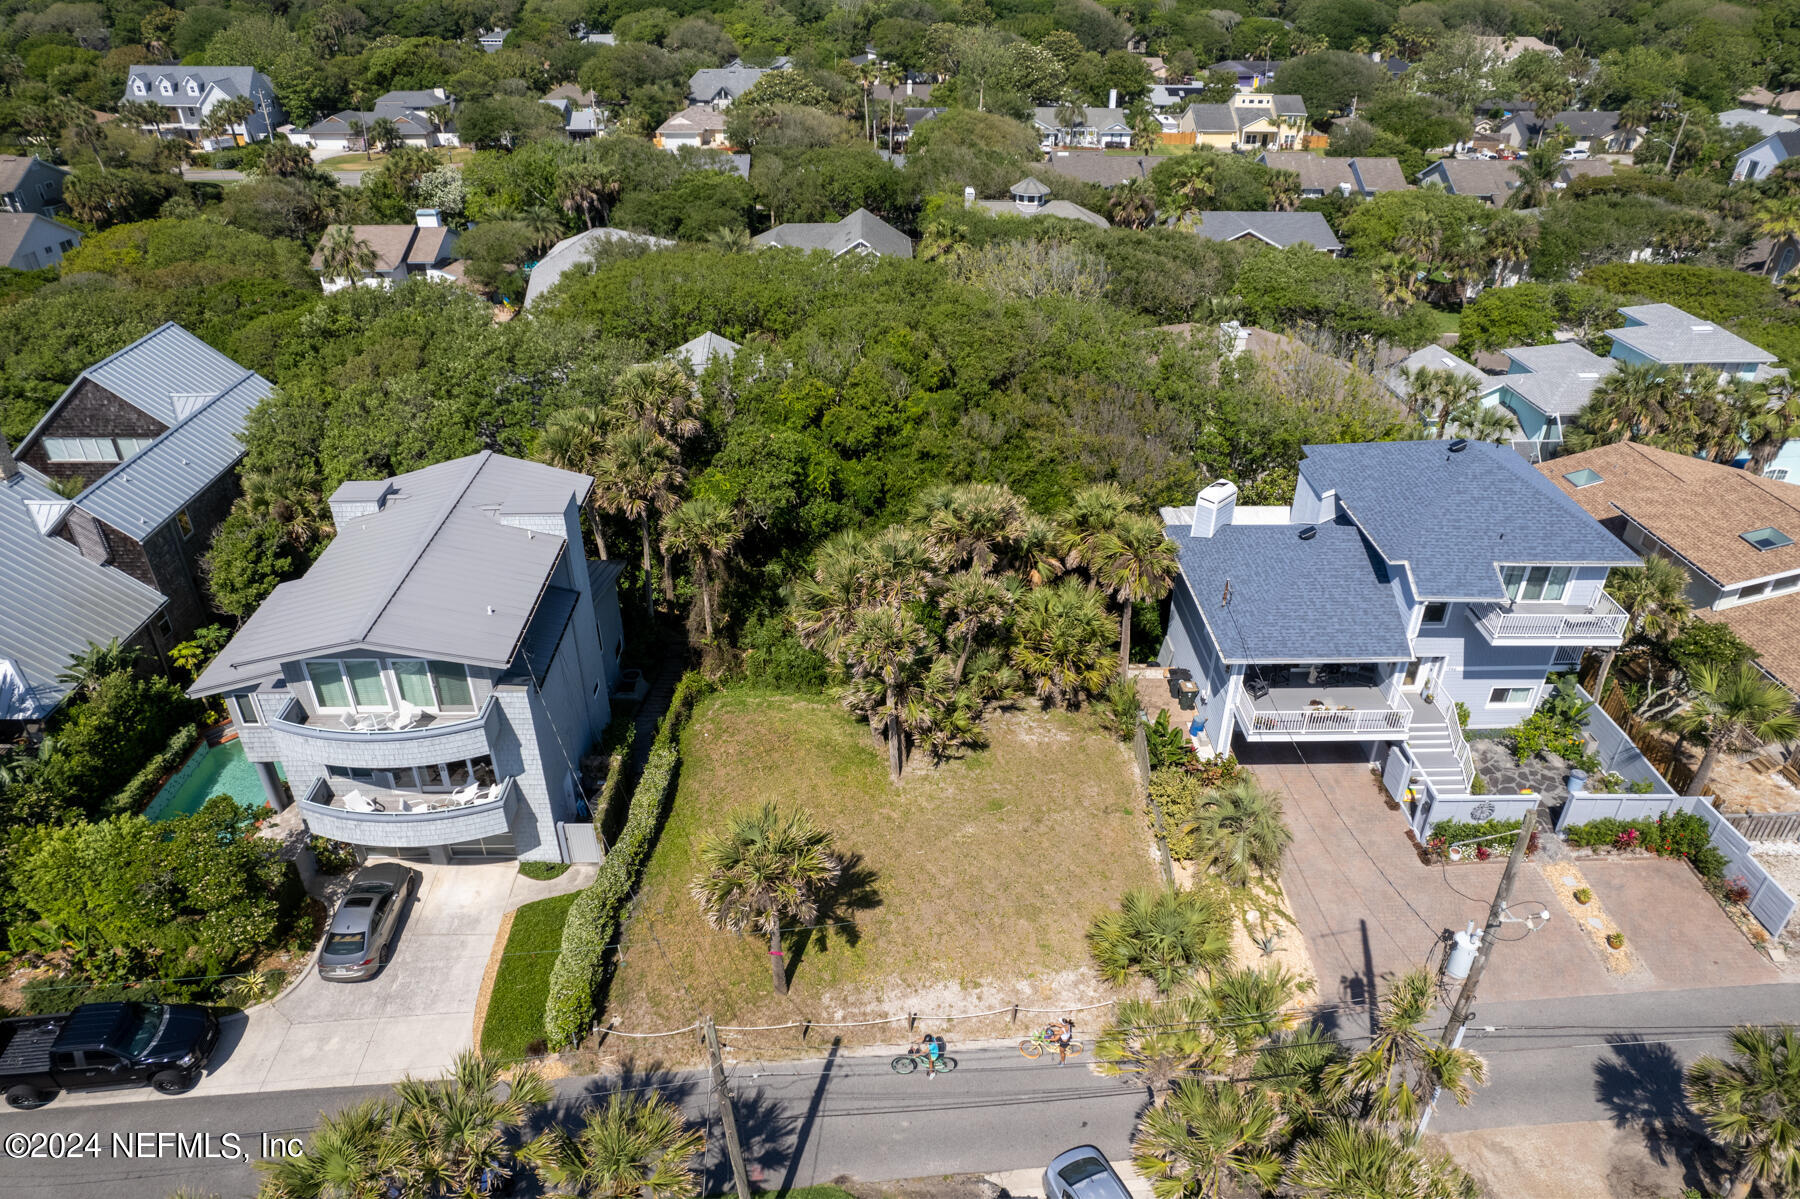 an aerial view of a residential houses with outdoor space and parking